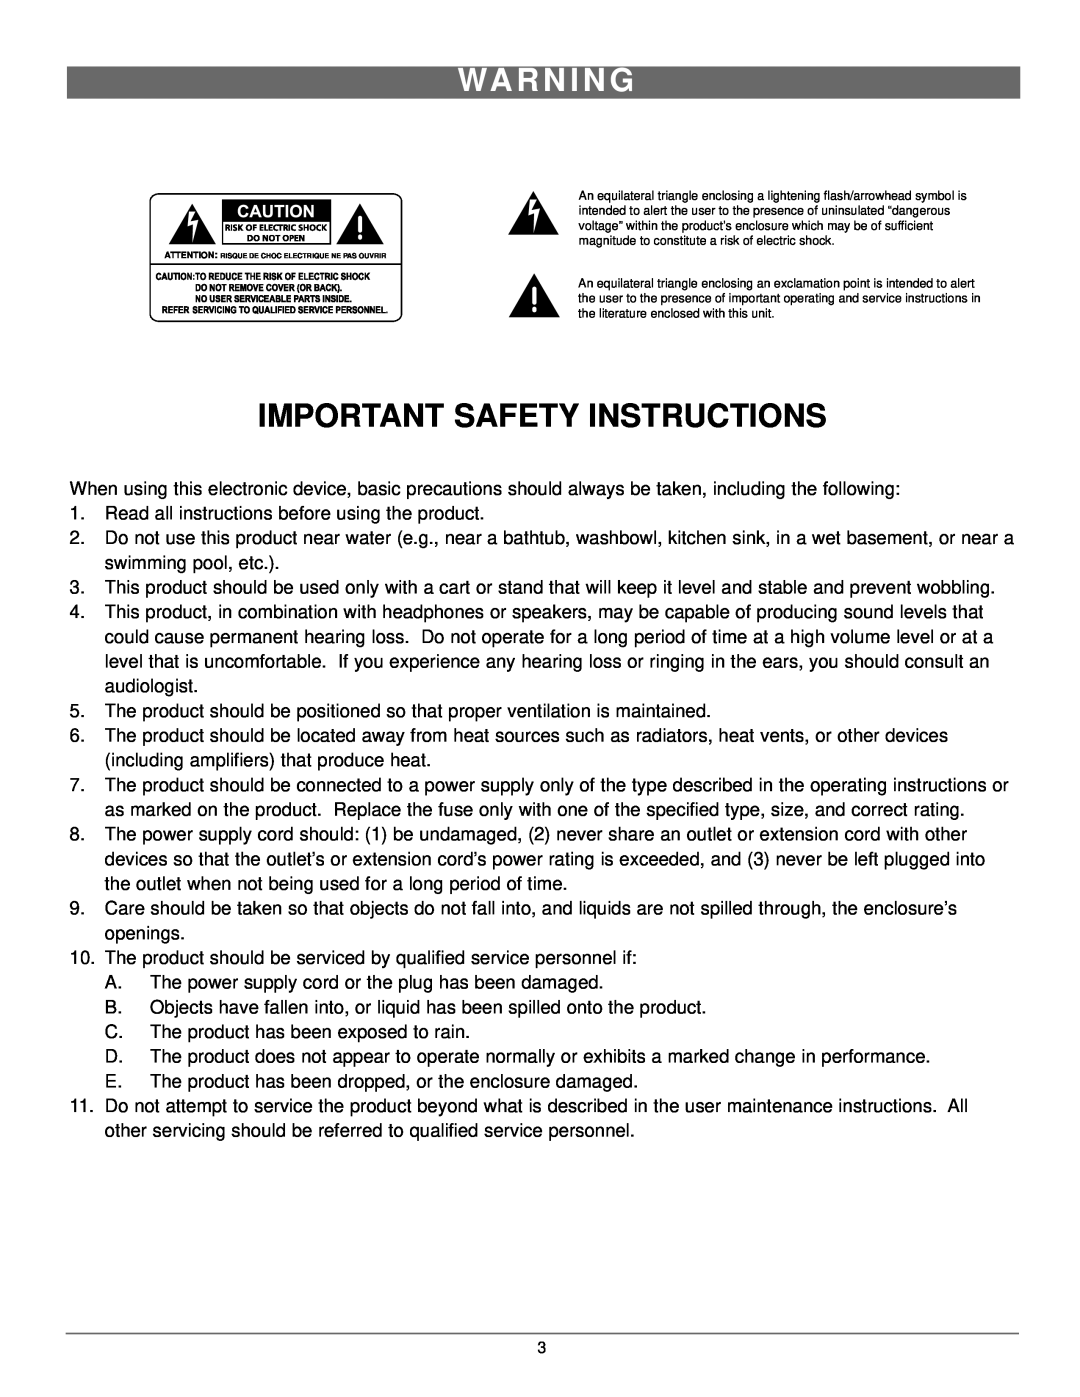 Nady Systems CMX-16A owner manual Wa R N I N G, Important Safety Instructions 